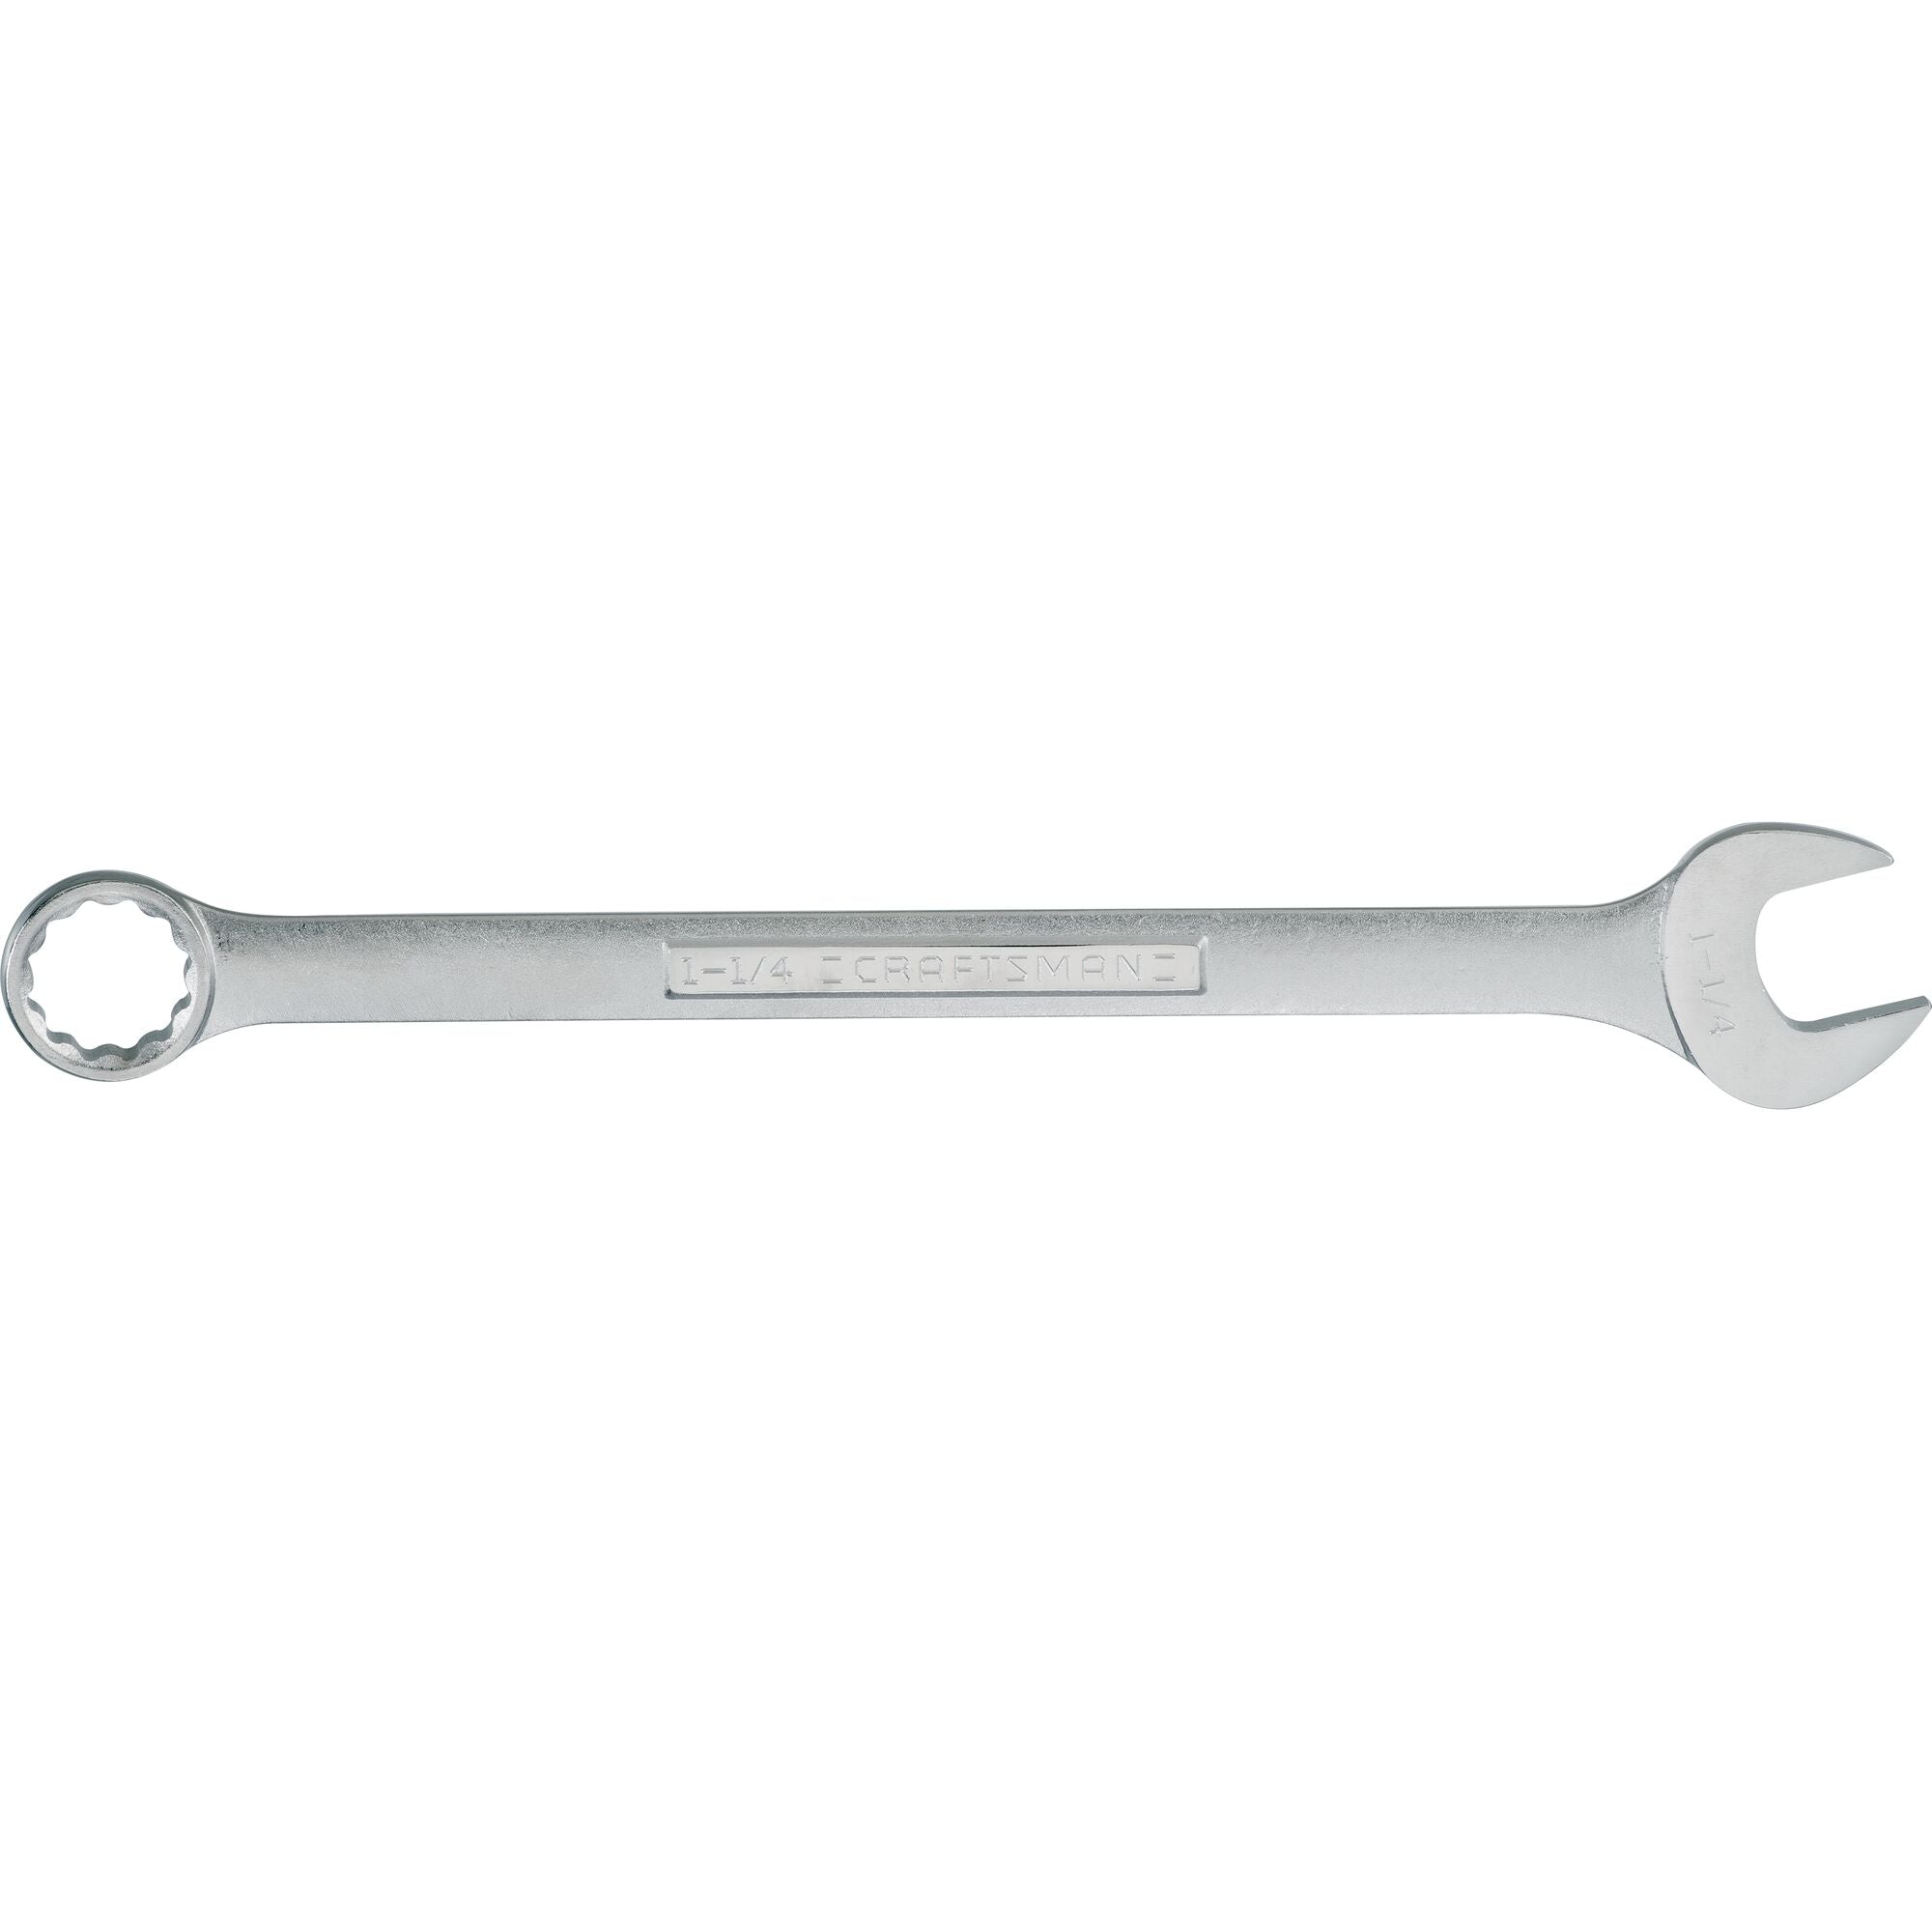 1-1/4-in Standard SAE Combination Wrench | CRAFTSMAN